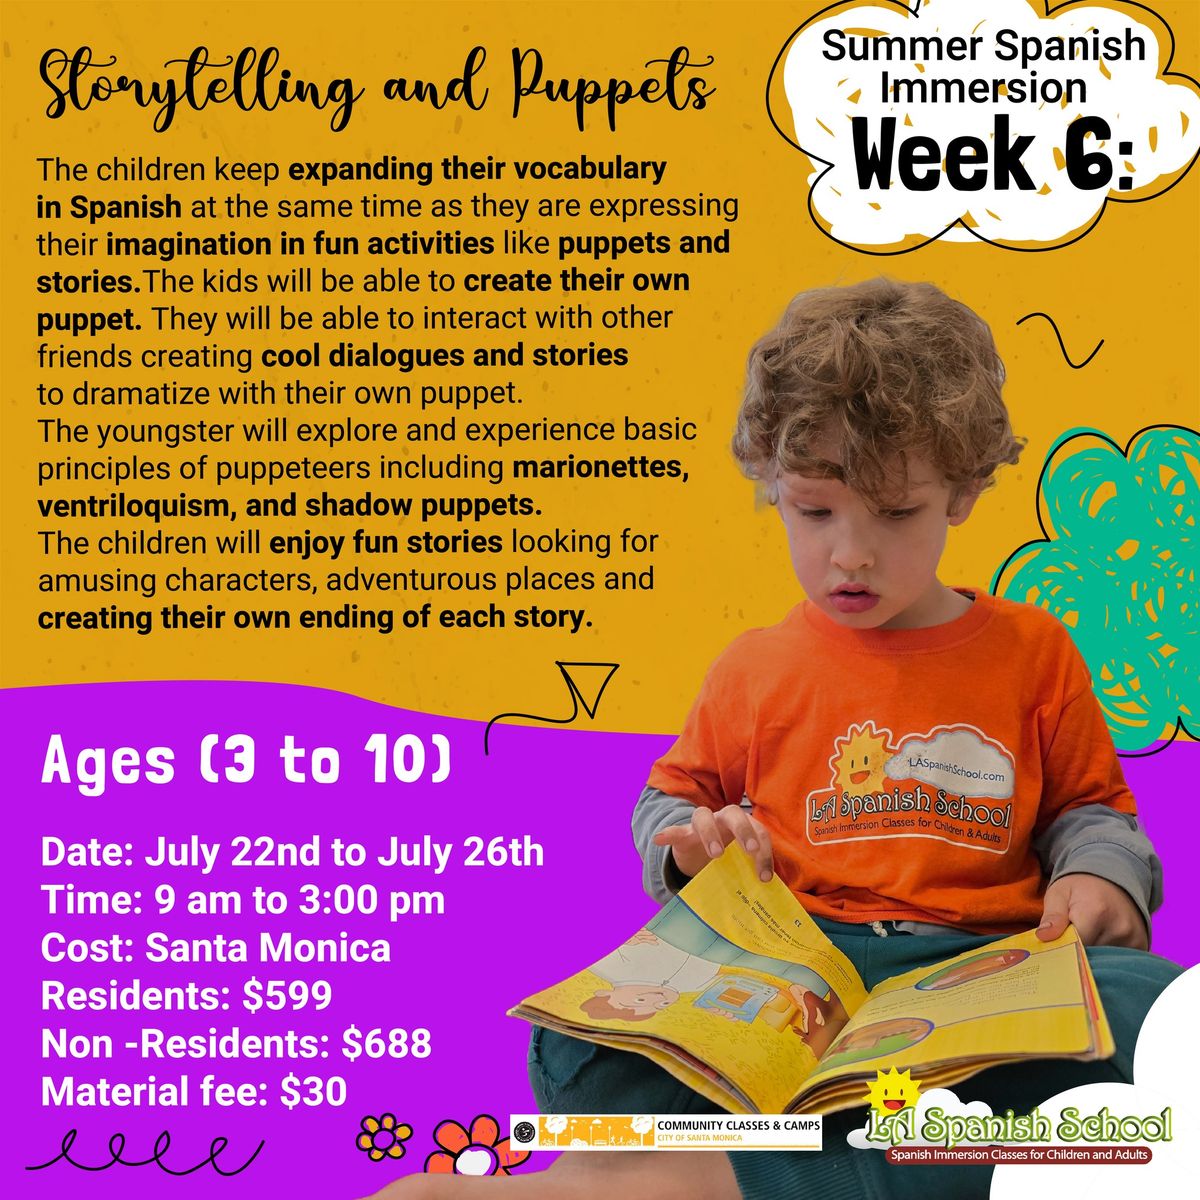 Summer Spanish Immersion Camps (Week 6)